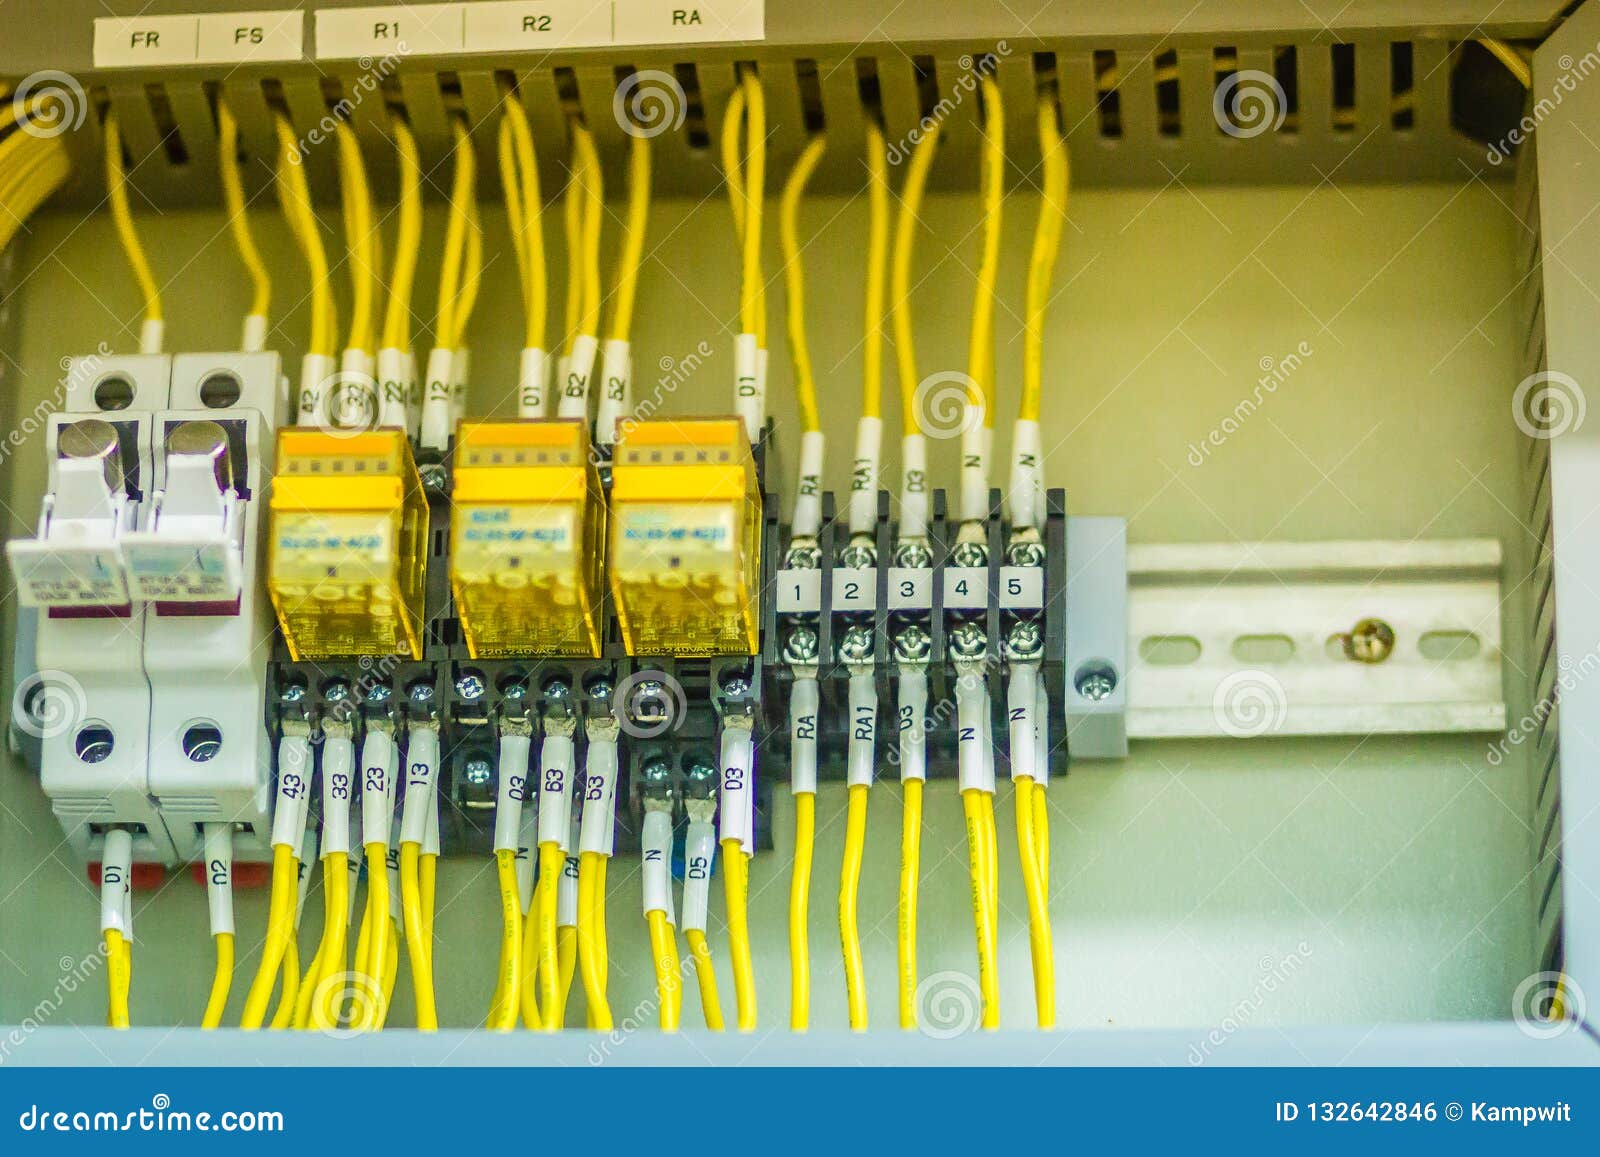 Details about   ELECTRIC CABLE ONE POLE MAIN SWITCH 1 80A SWITCHBOARD ELECTRICAL 